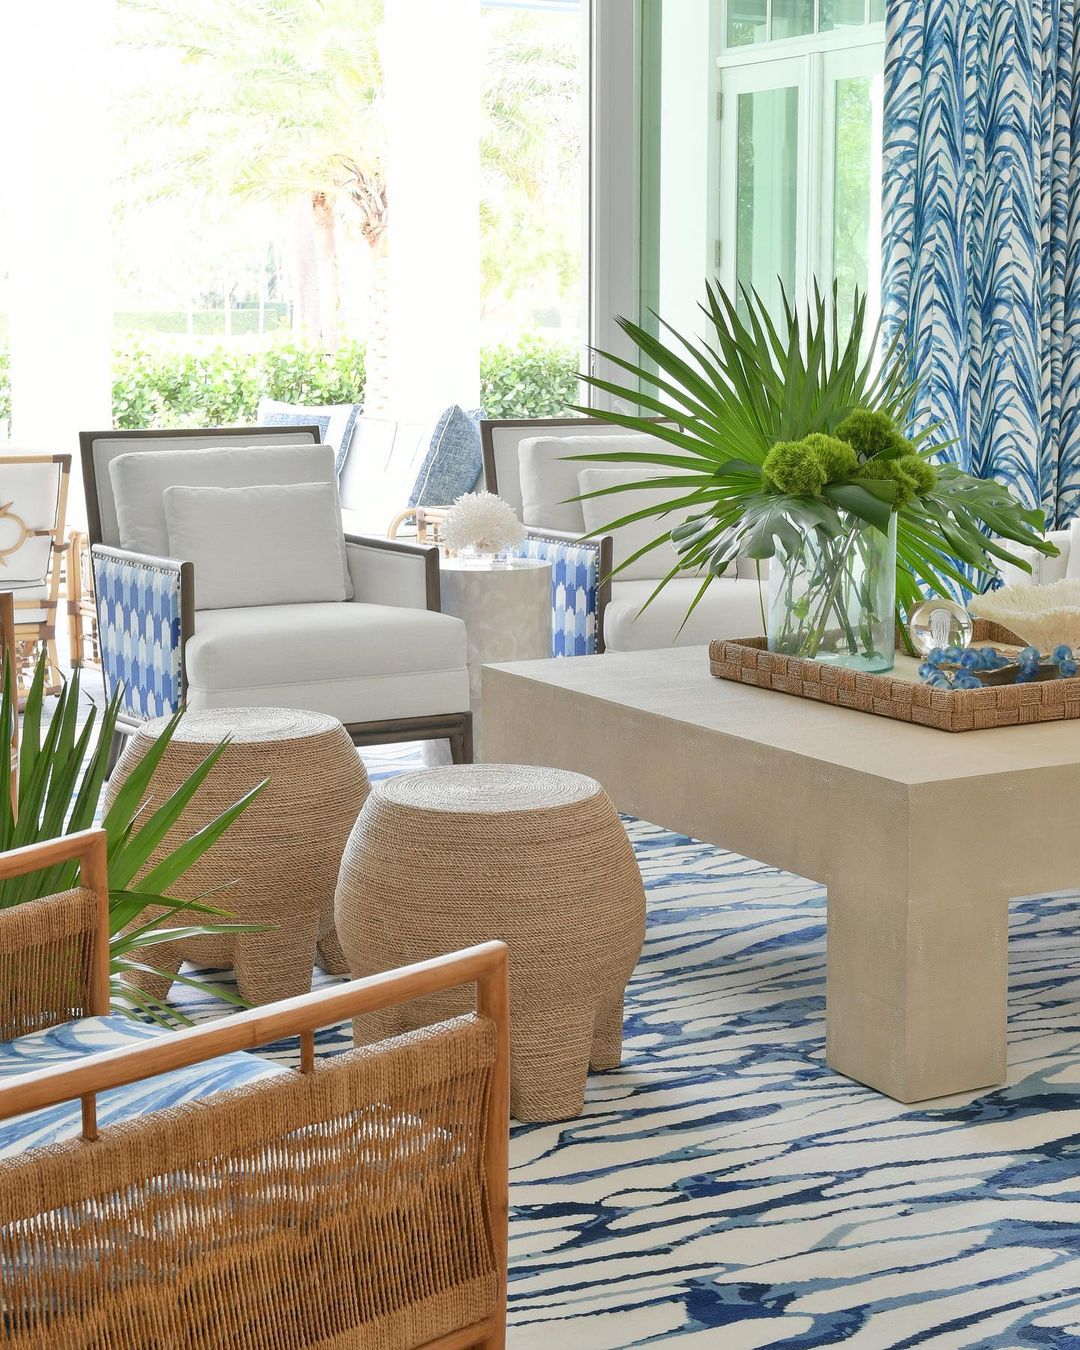 Beach House Perfection: Styling and Furnishing Your Home with Modern Coastal Flair